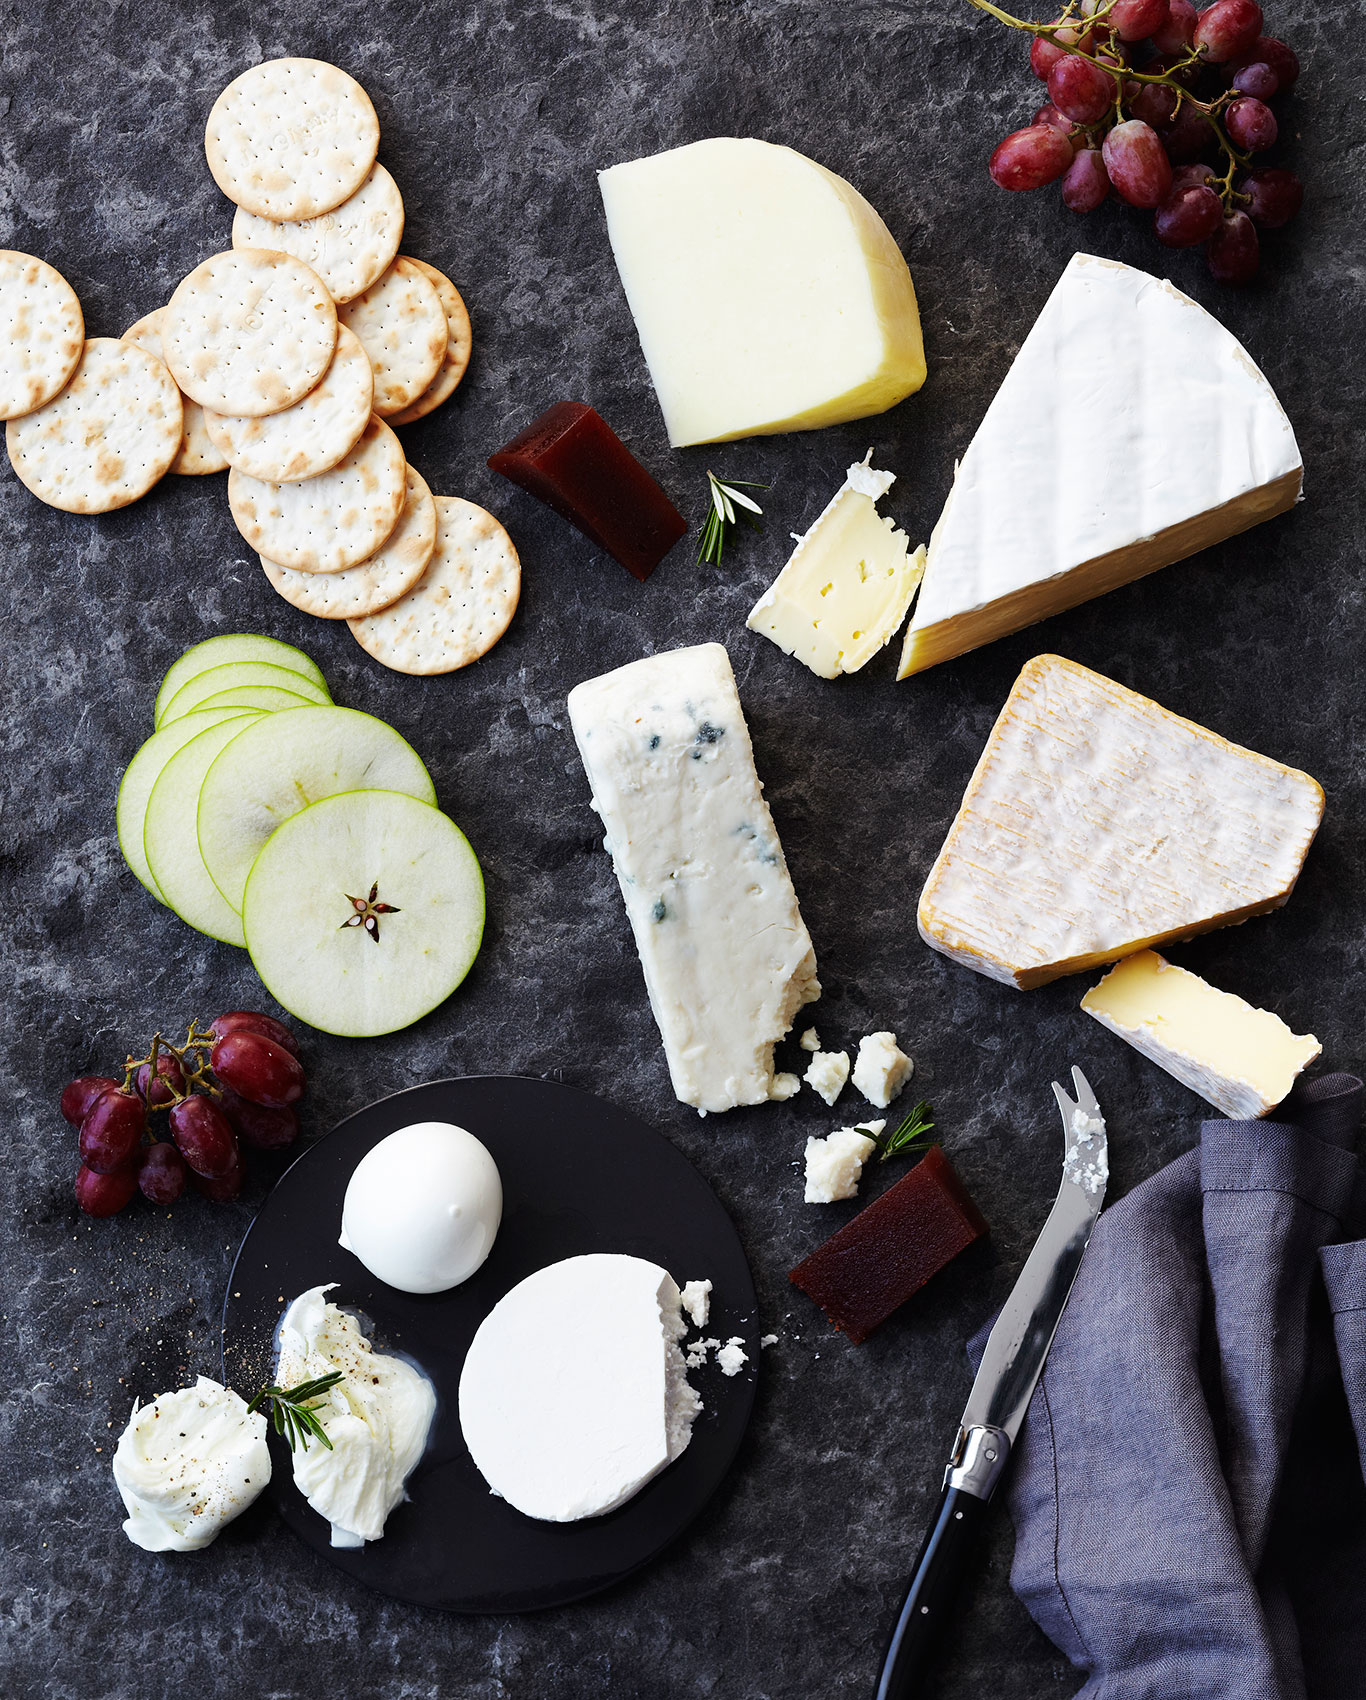 Southon Cooking • The Foodstore Cheeseboard with Grape, Apple & Rosemary • Hospitality & Editorial Food Photography